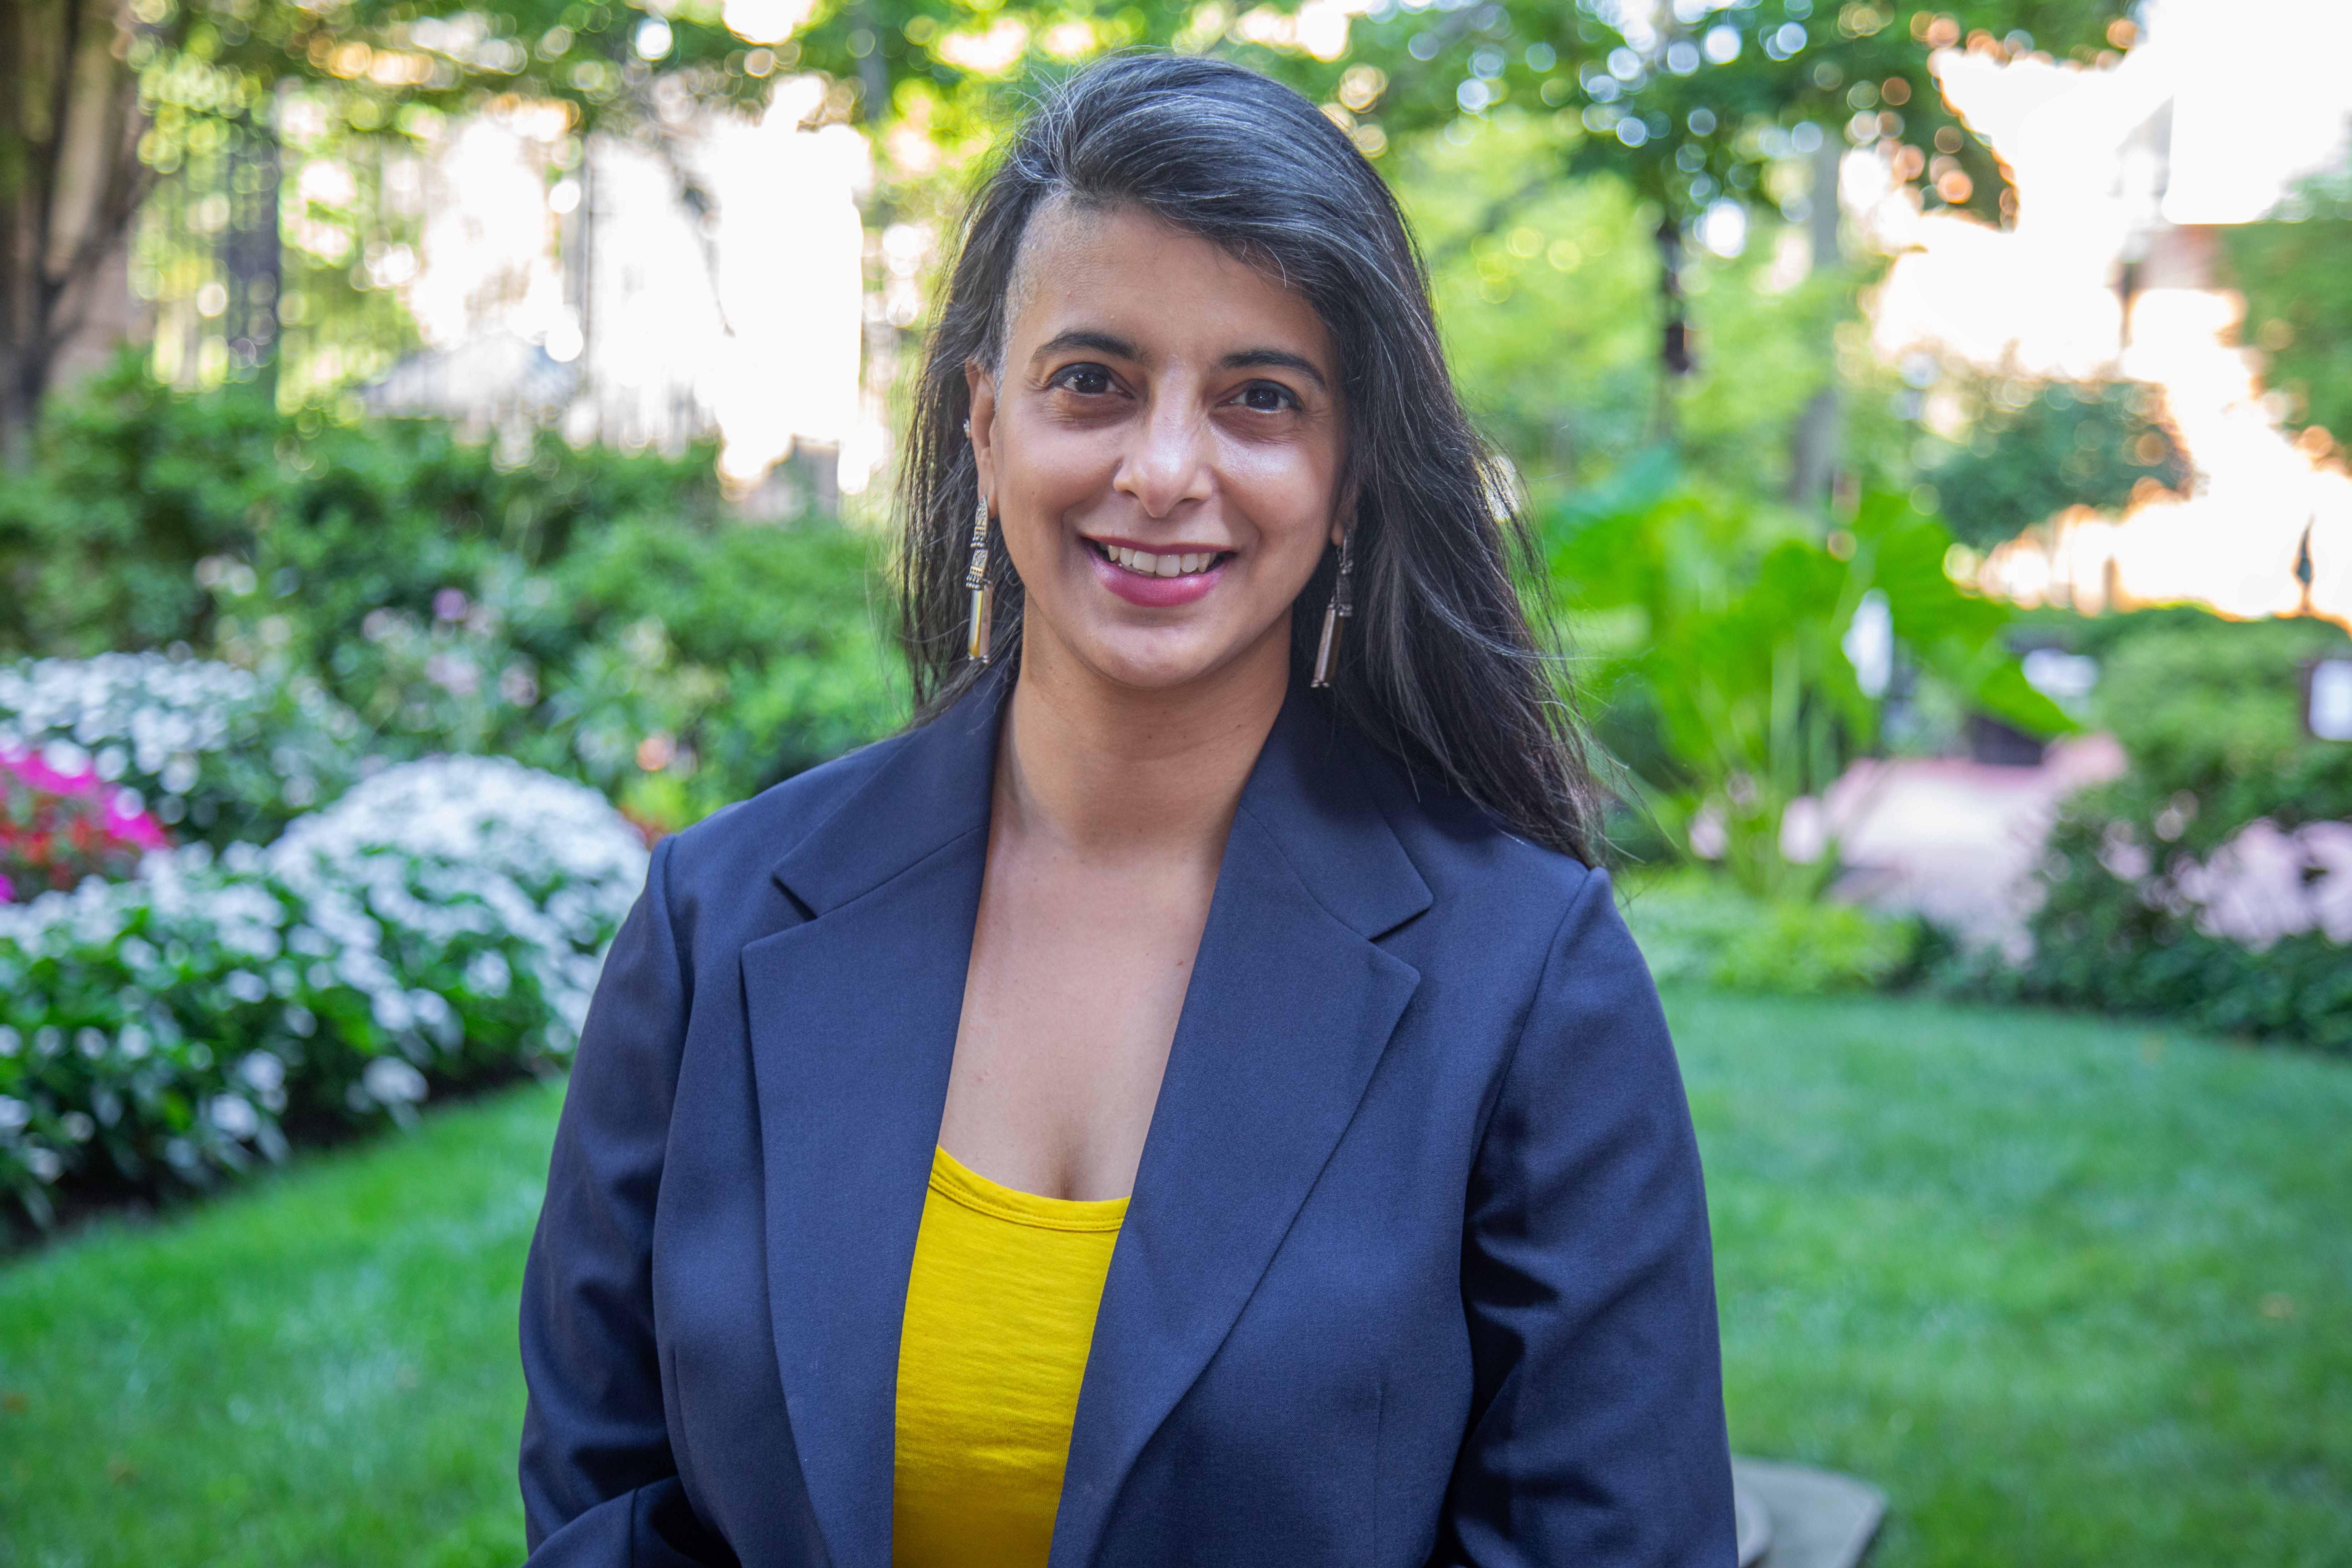 Shayoni Mitra headshot. She is wearing a yellow shirt and black blazer. Campus greenery is behind her